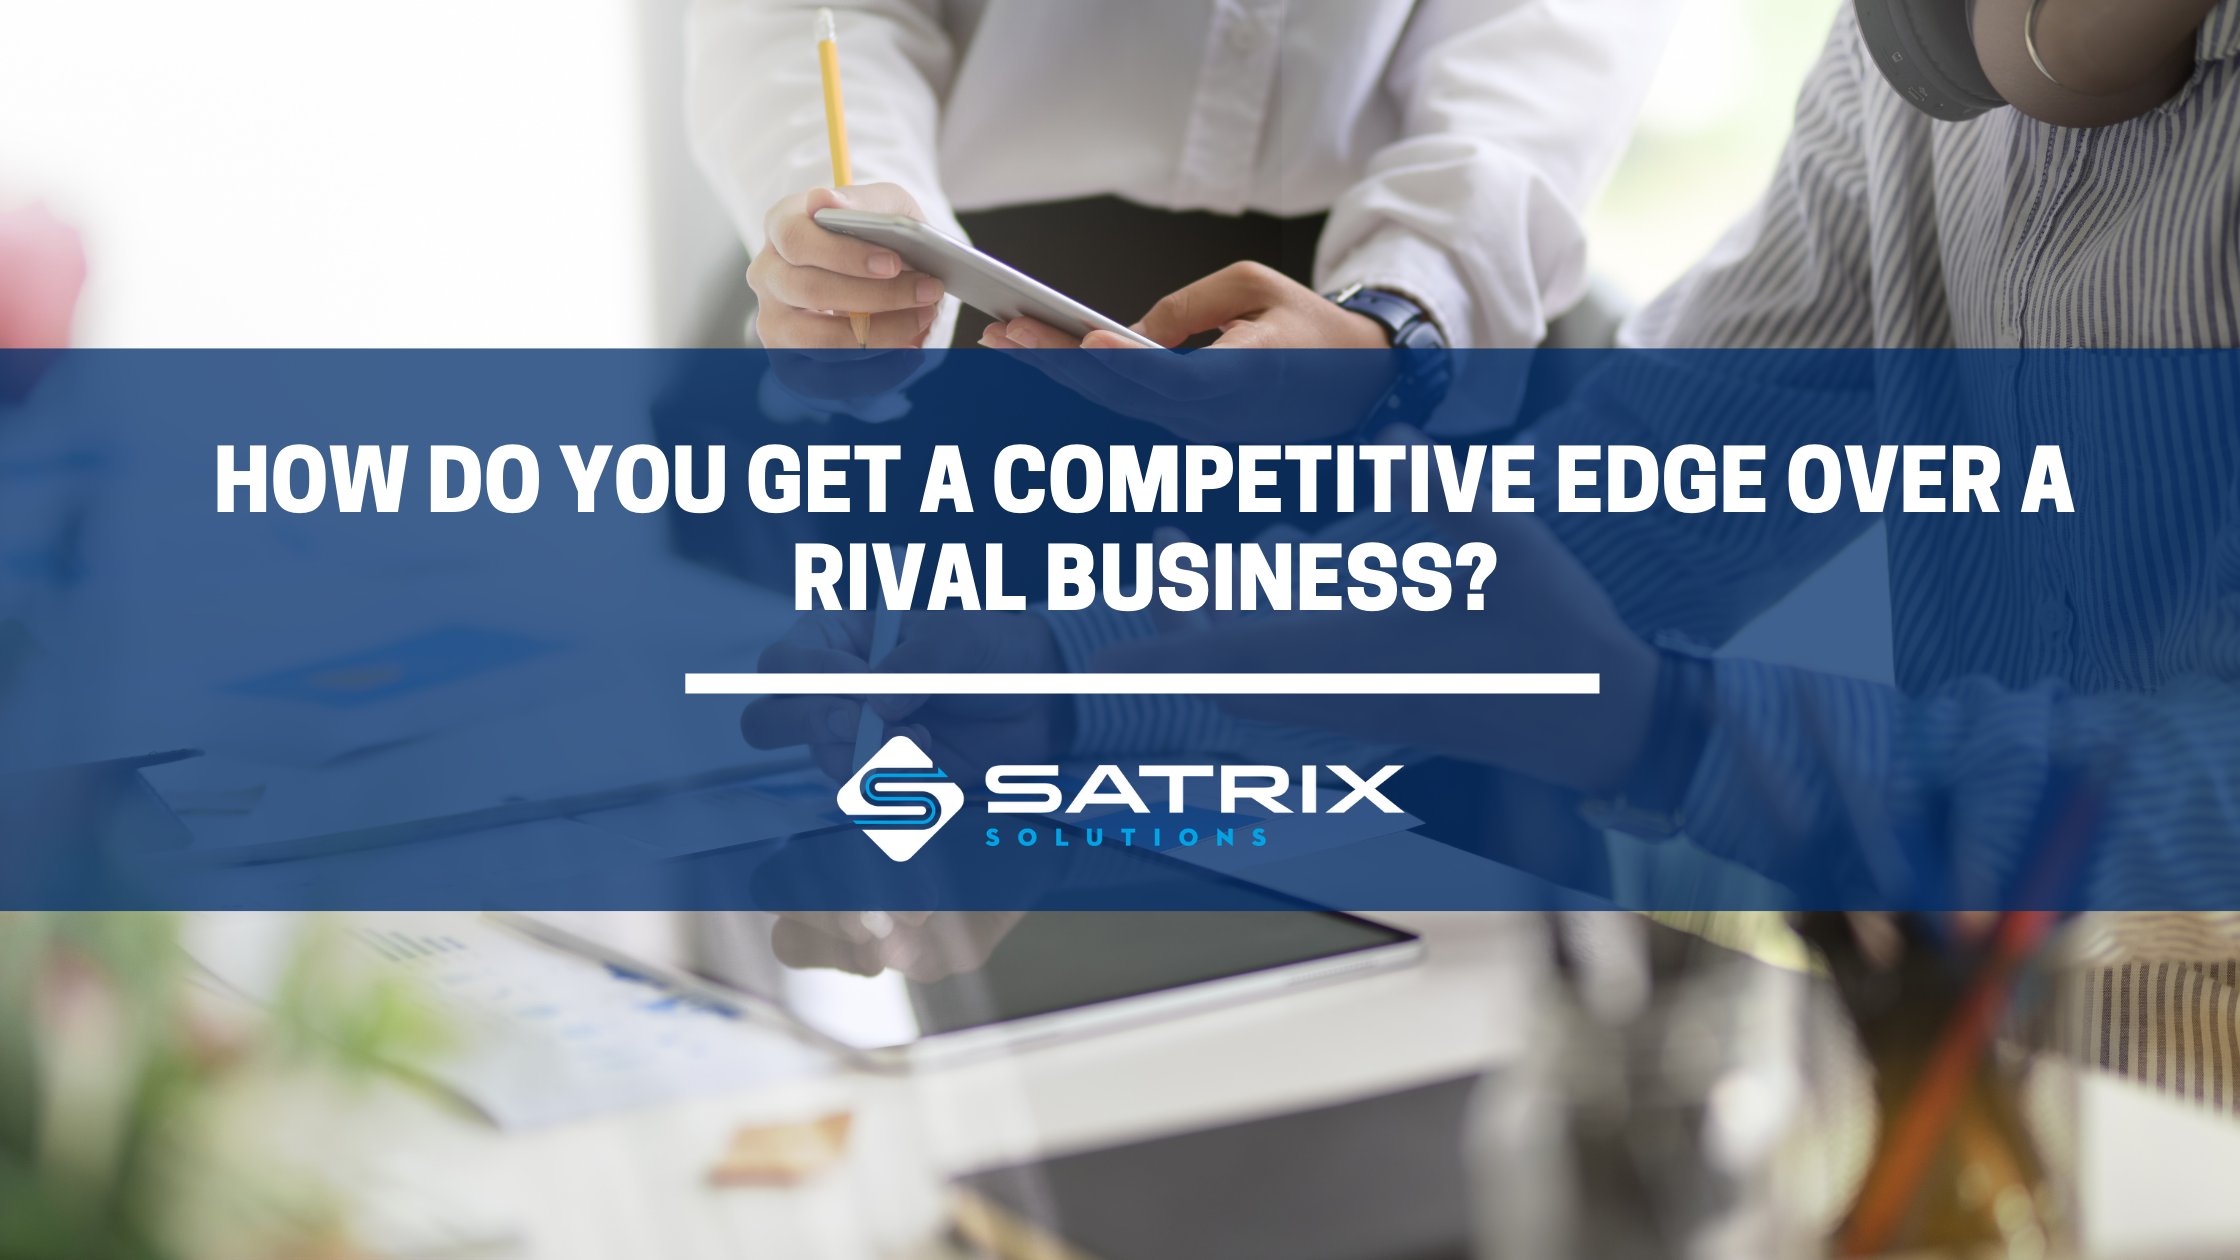 How Do You Get a Competitive Edge Over a Rival Business?